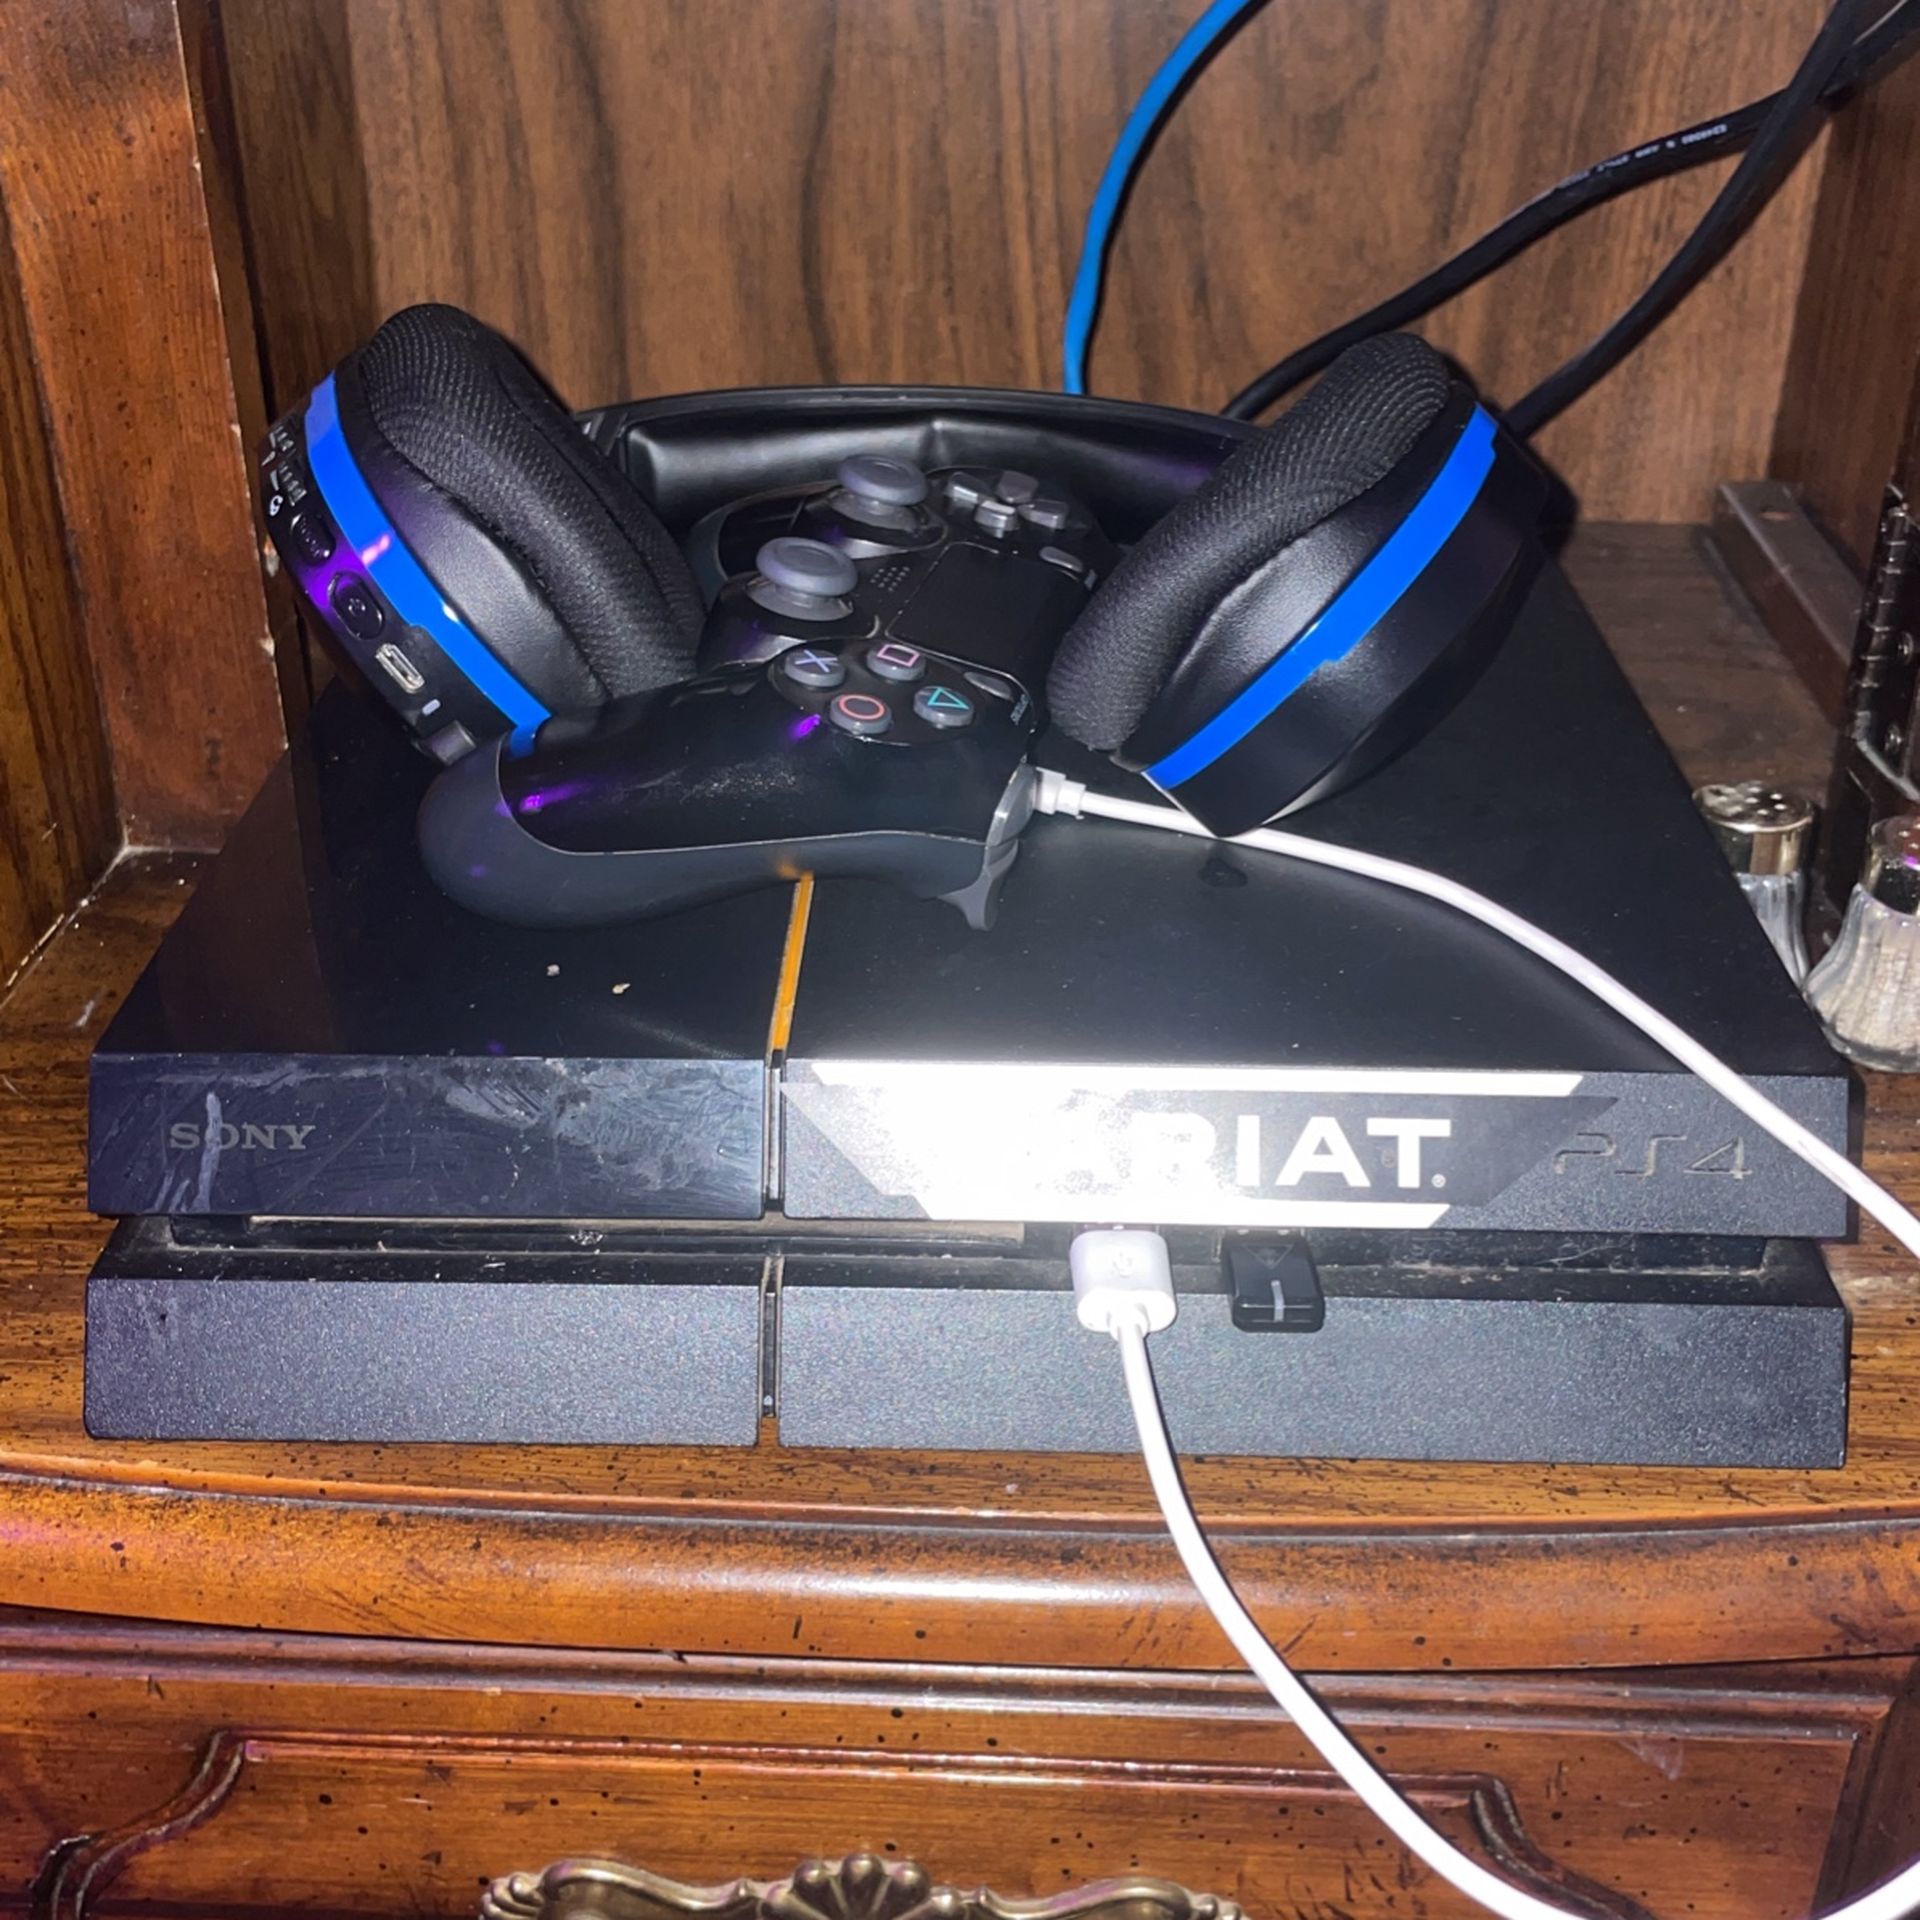 ps4 2 remotes and turtle beach headset. 